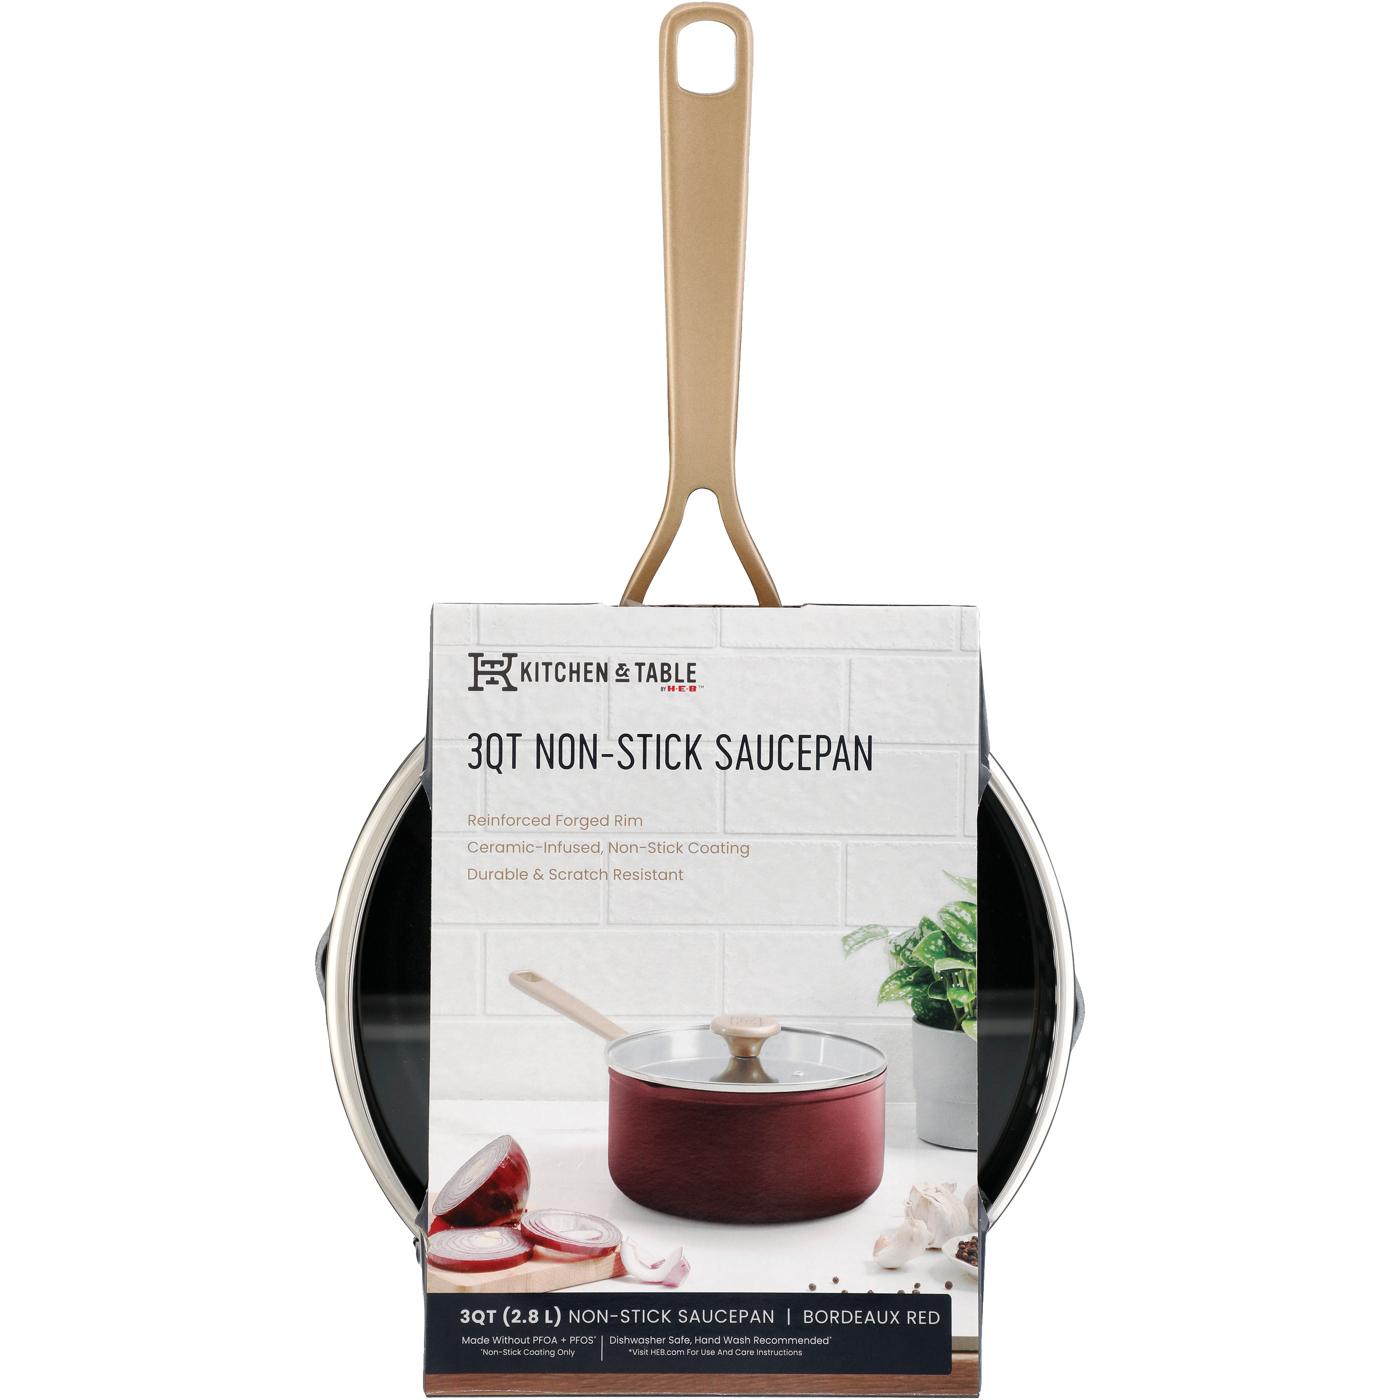 Kitchen & Table by H-E-B Non-Stick Saucepan - Bordeaux Red; image 6 of 7